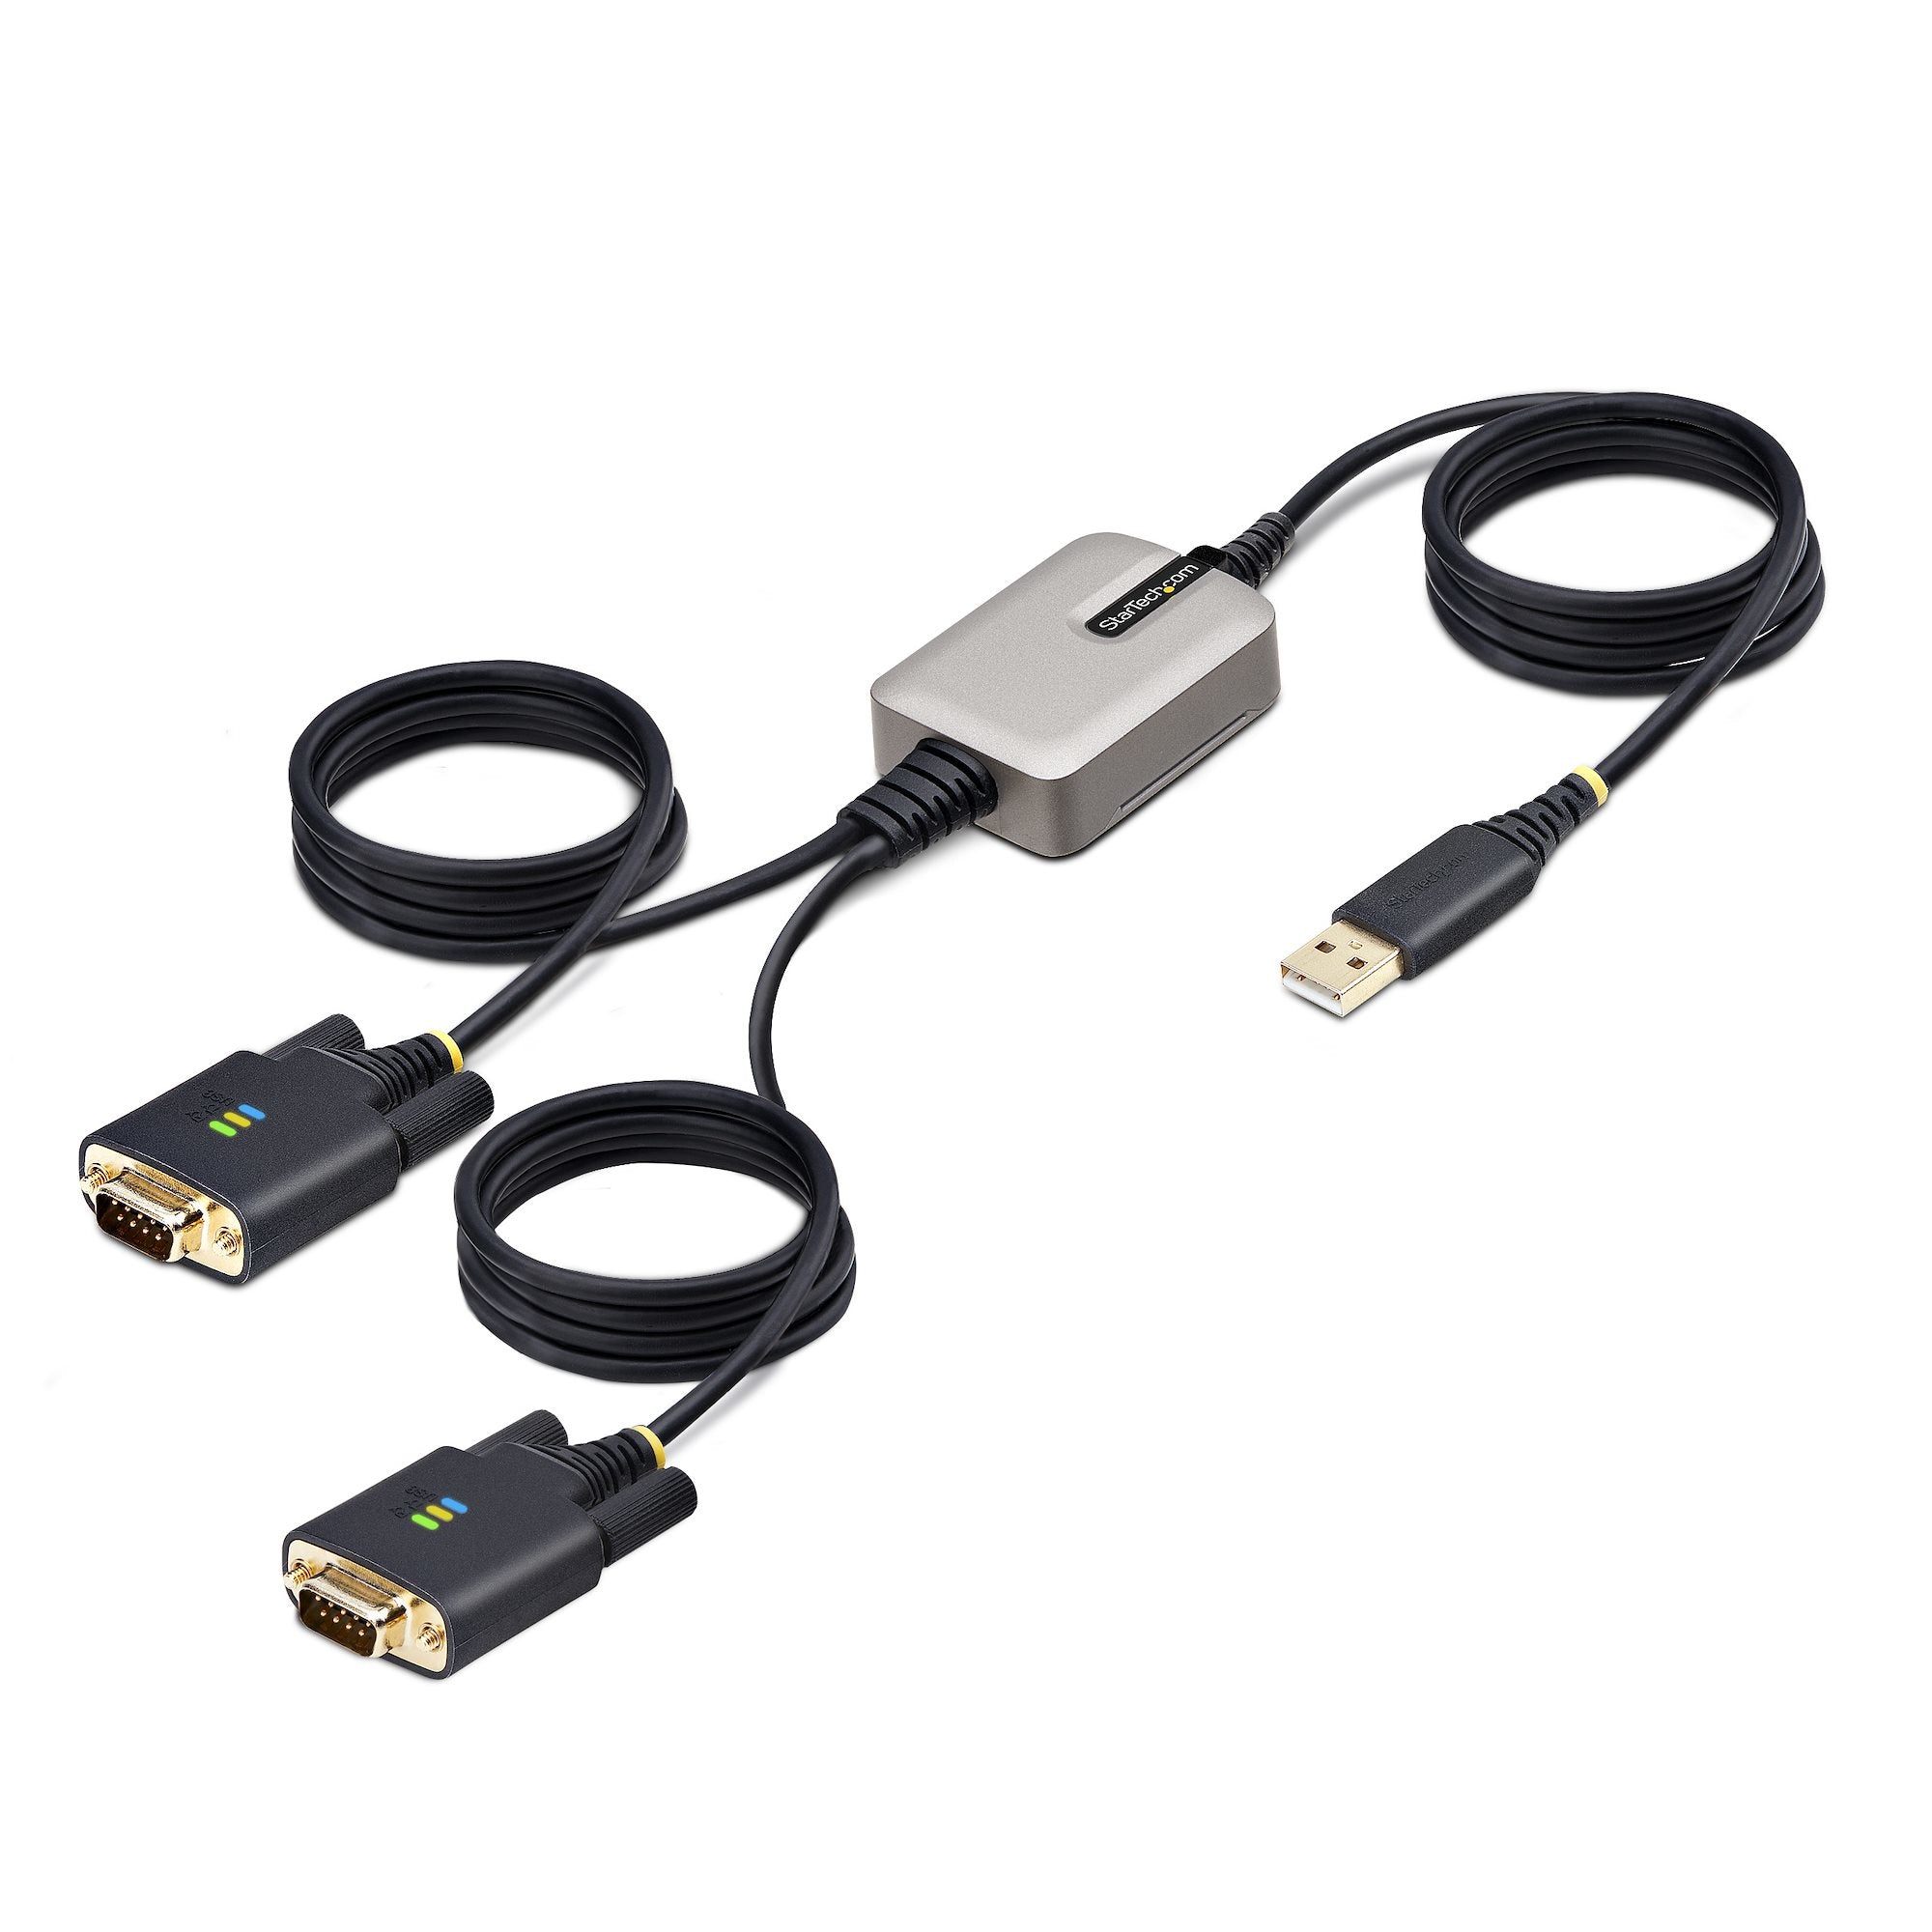 13ft (4m) 2-Port USB to Serial Adapter Cable